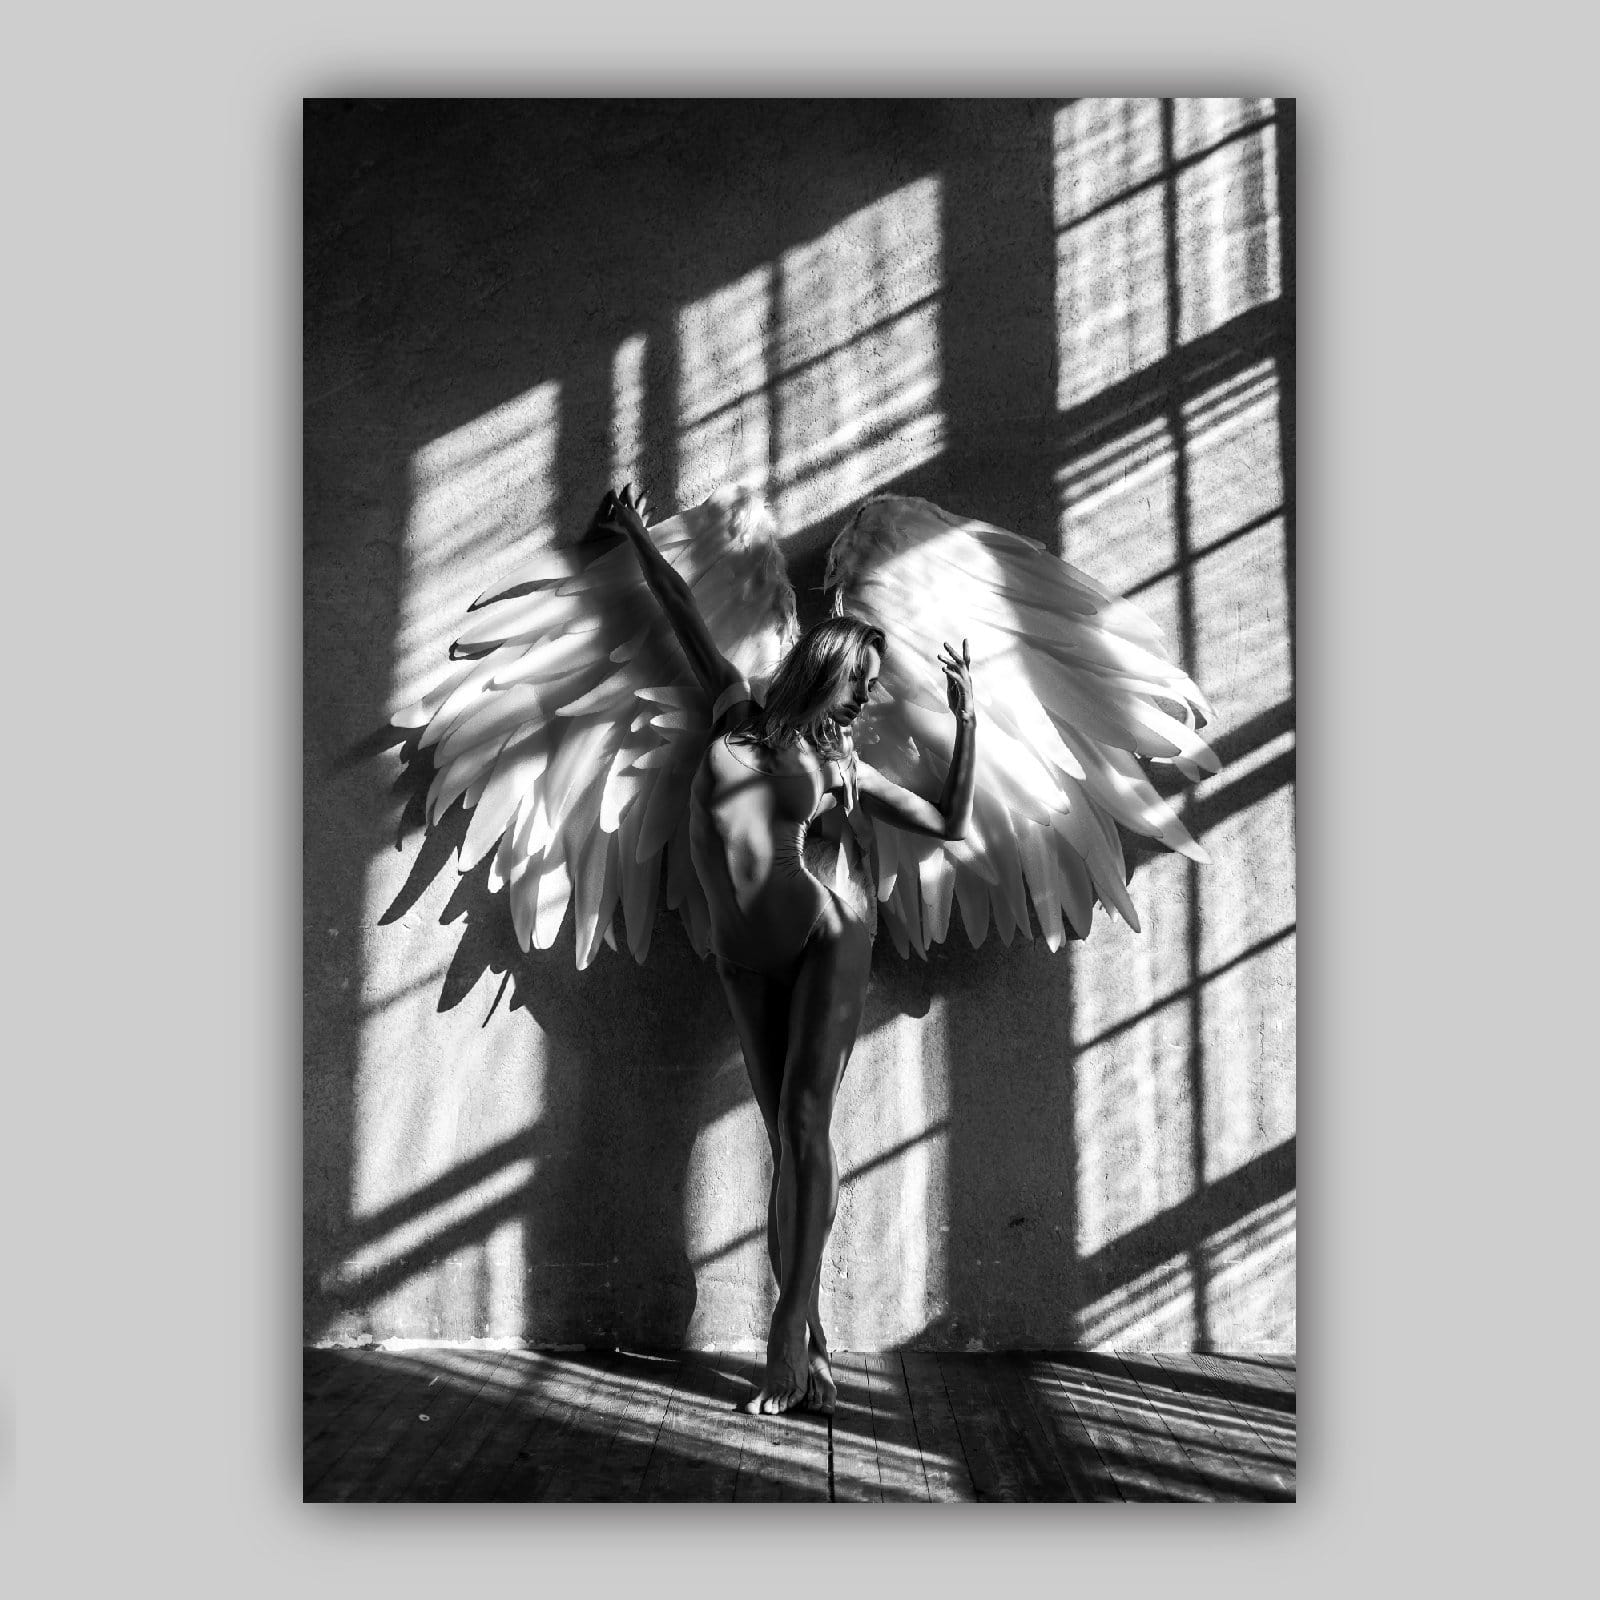 Set of 3 FASHION Woman Angel Wings Window Shadow Monochrome Black and White Photograph Gallery Wall Art Print Picture Poster